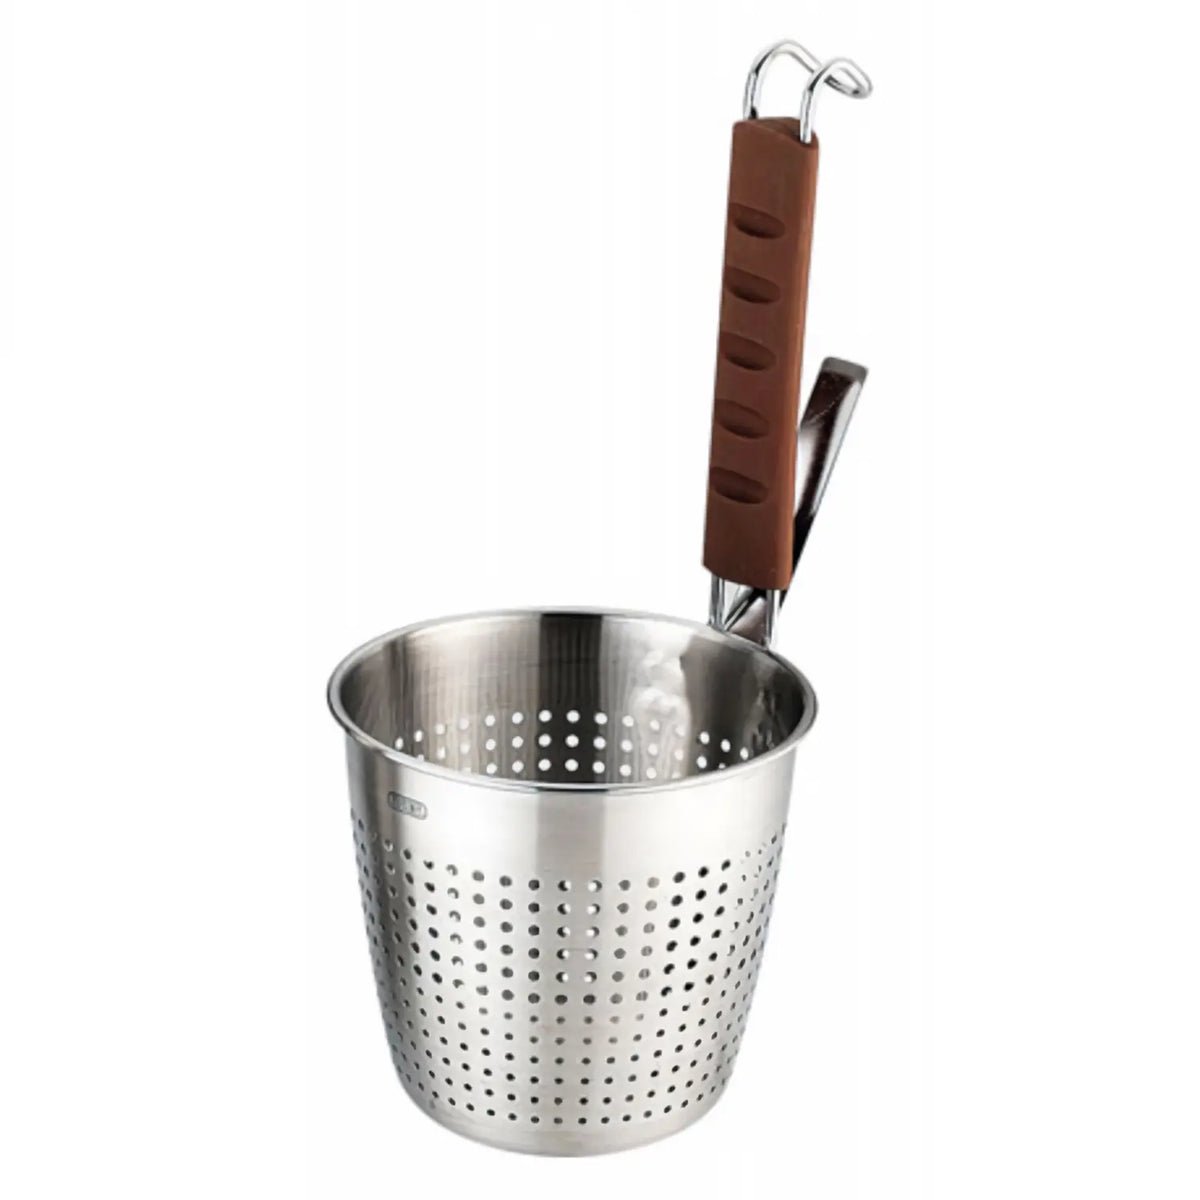 YUKIWA Stainless Steel Perforated Tebo Noodle Strainer with Silicone Handle